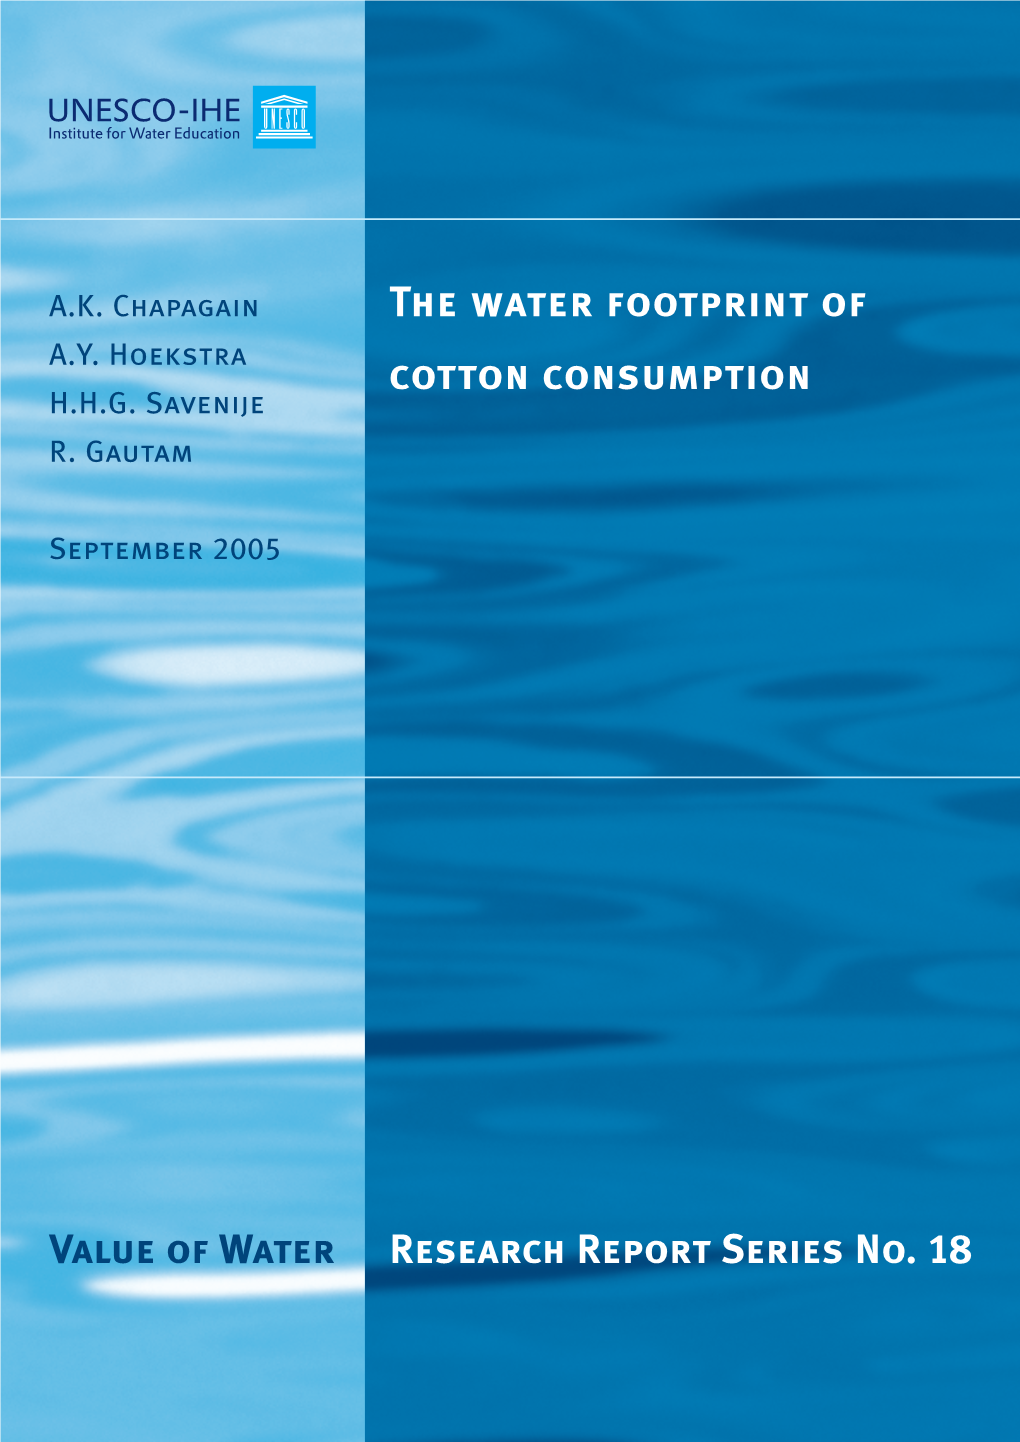 The Water Footprint of Cotton Consumption